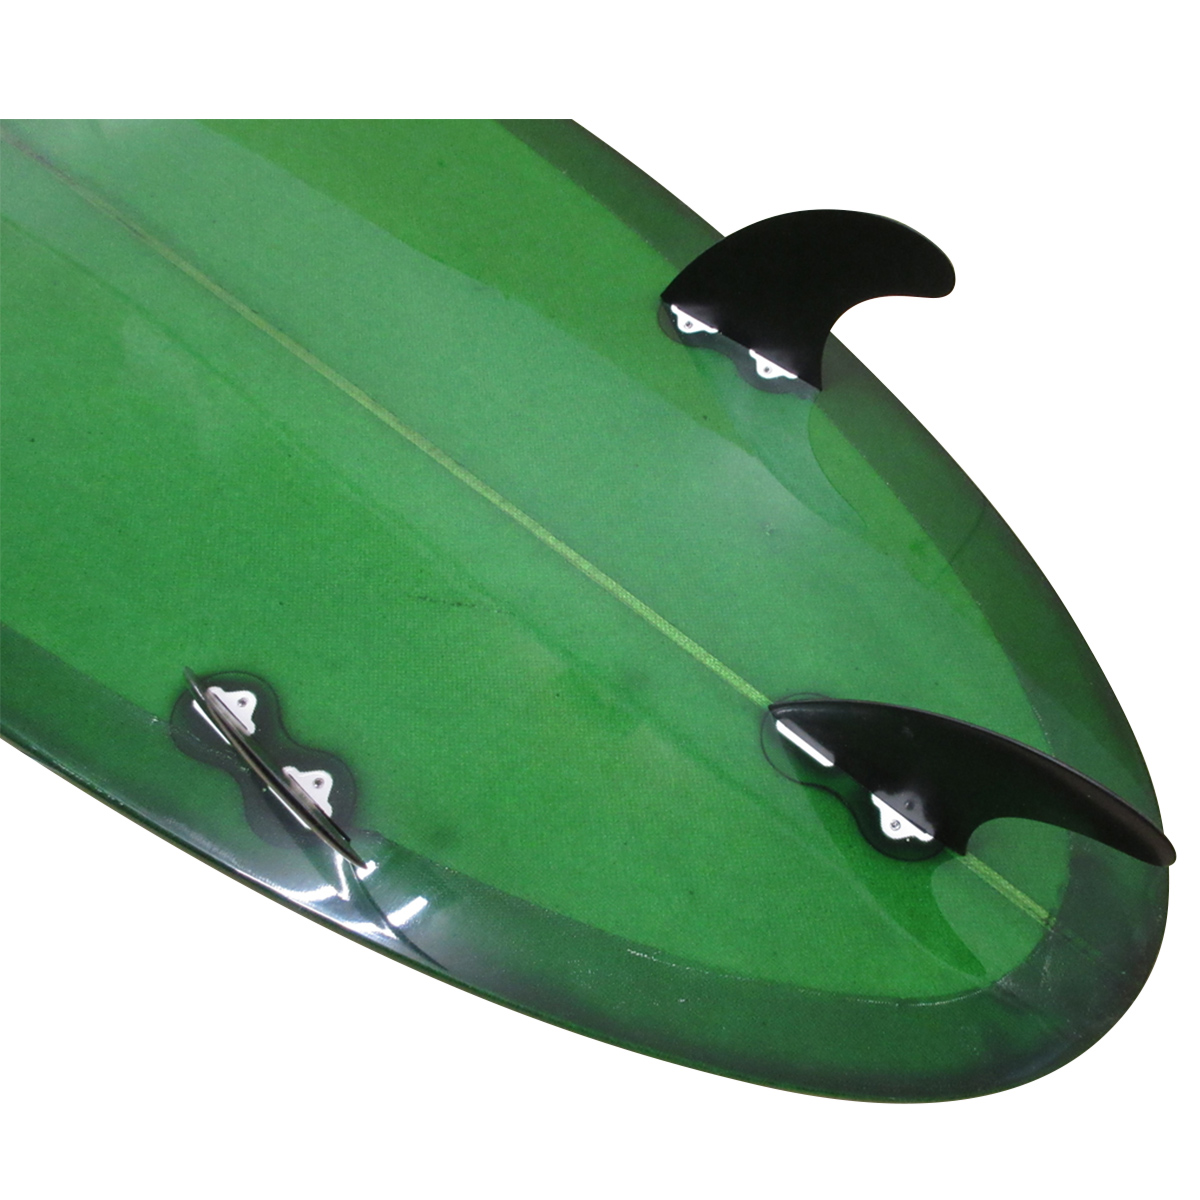 Nodecal / Round Tail Tri 6`4 Moss Green